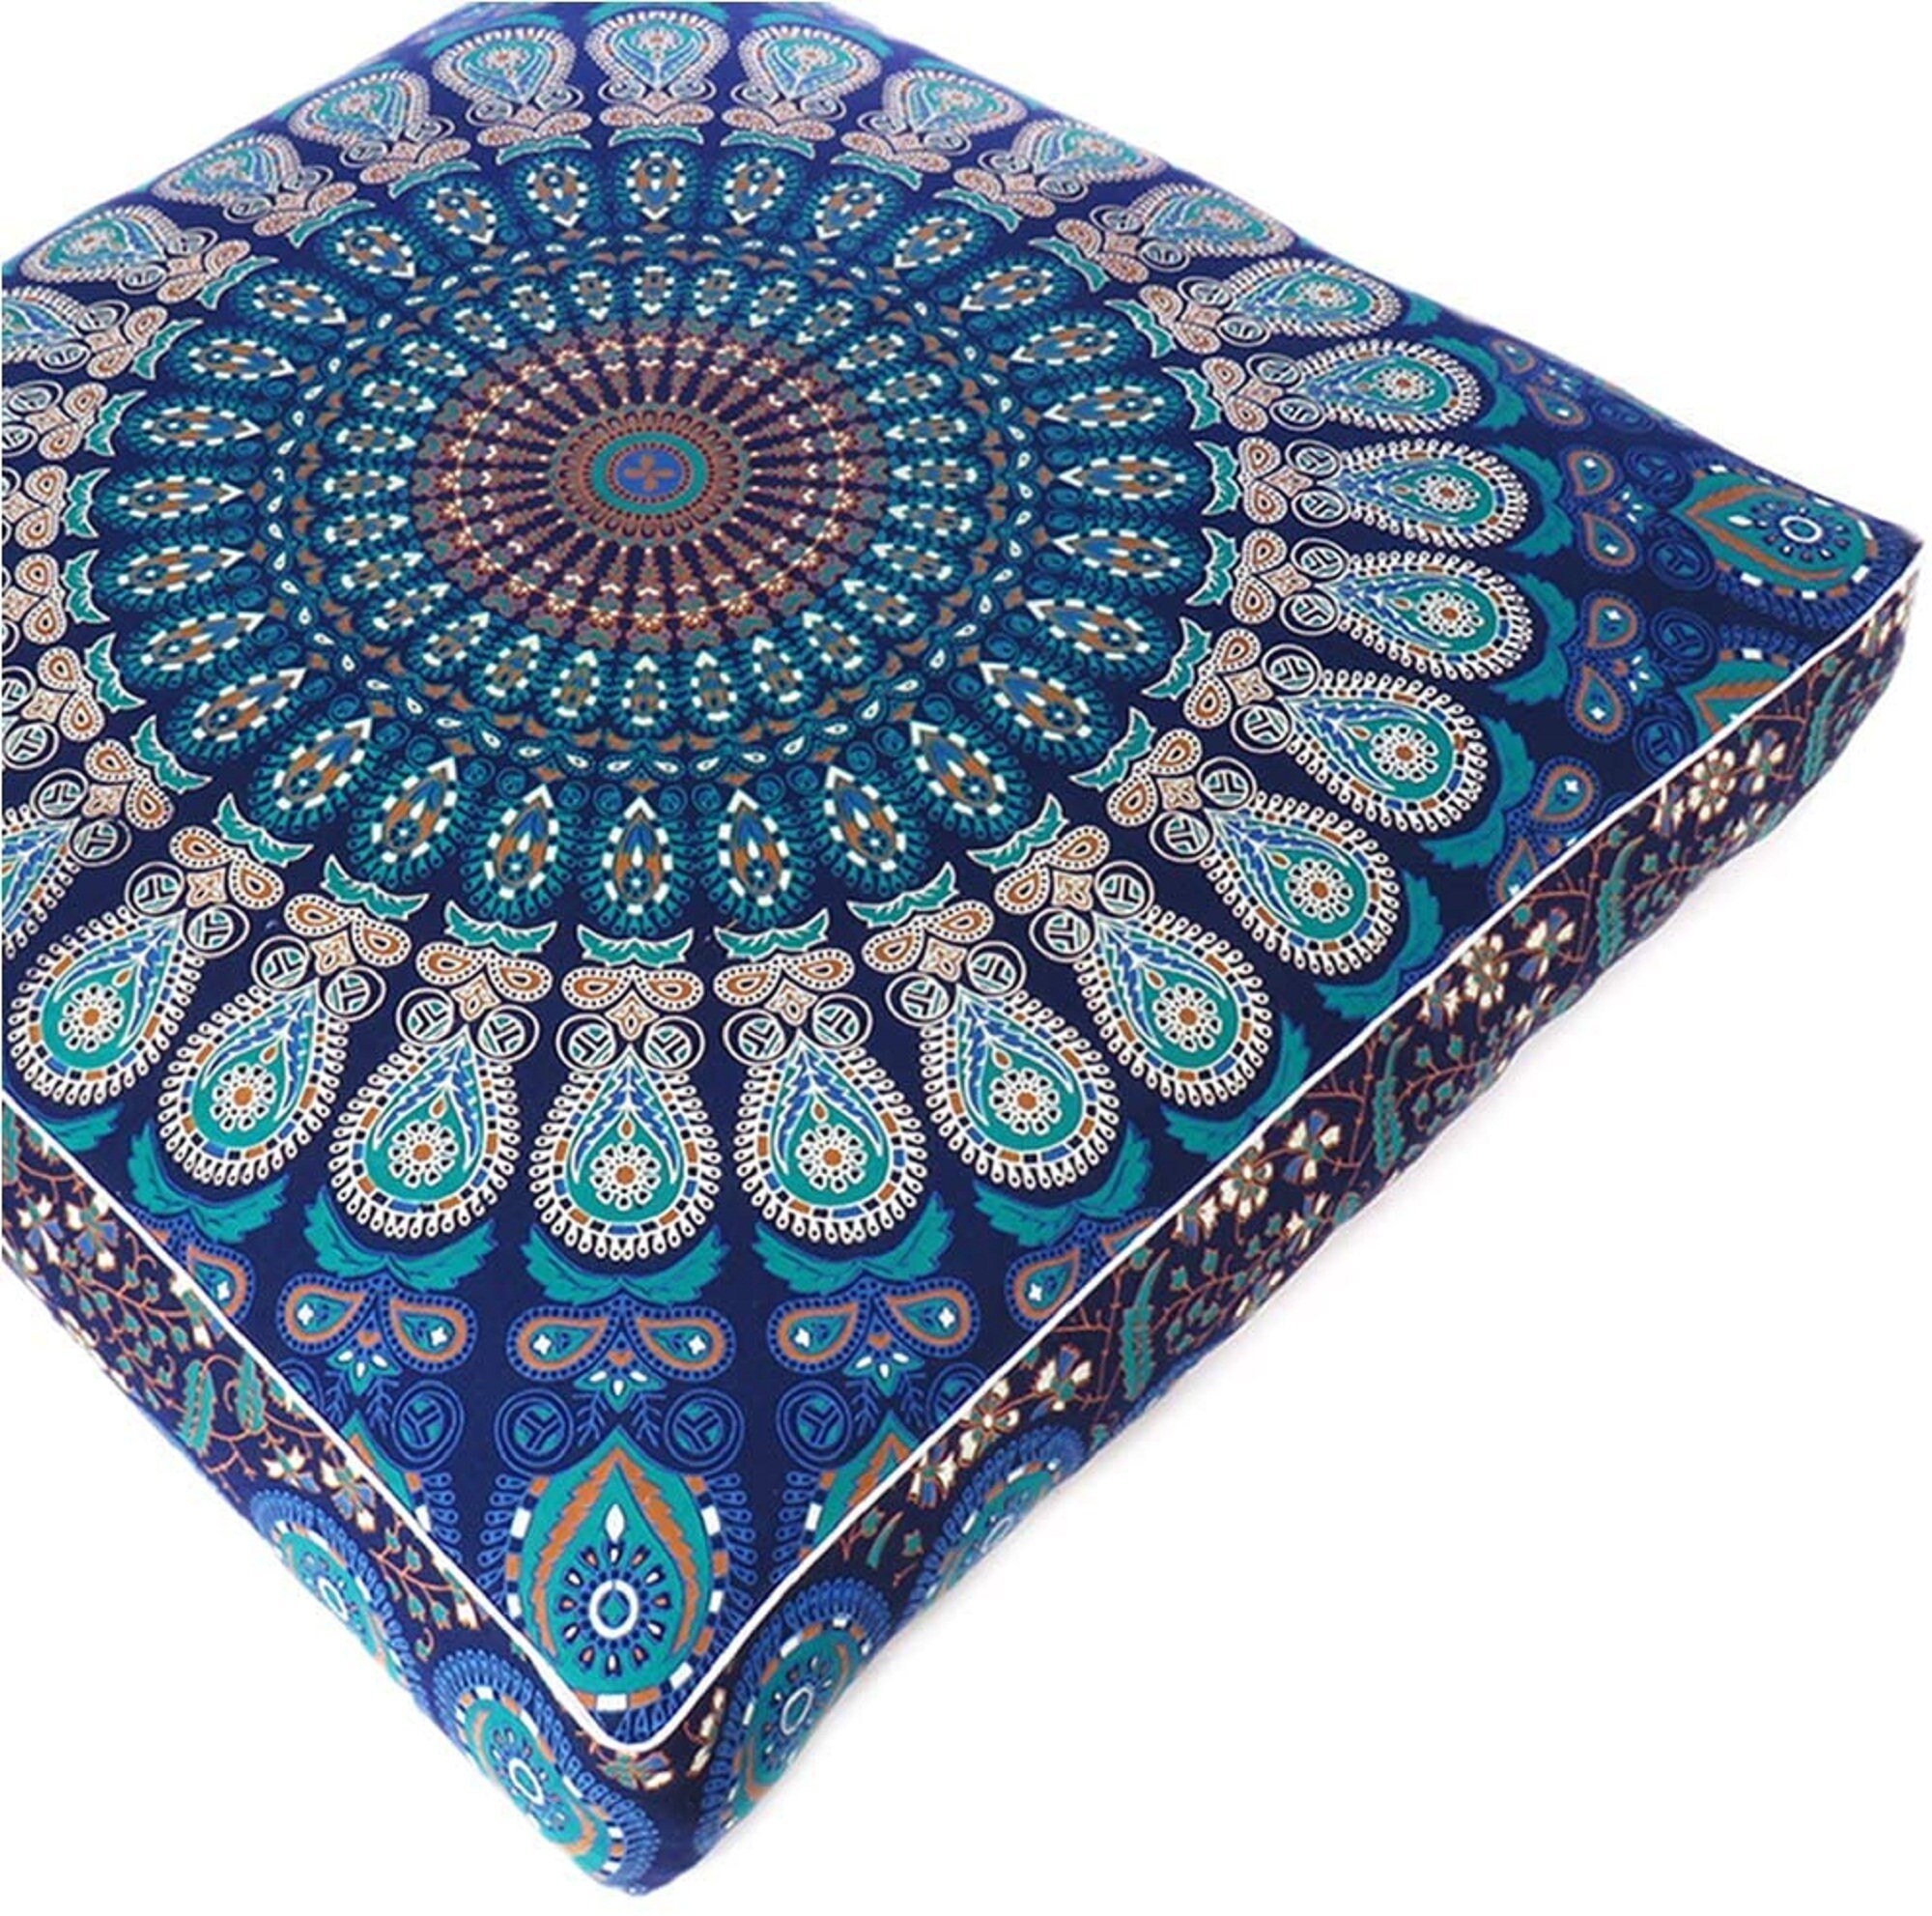 35" Indian Mandala Square Floor Cushion Cover Pillow Decor Pet Bed Seat Covers 